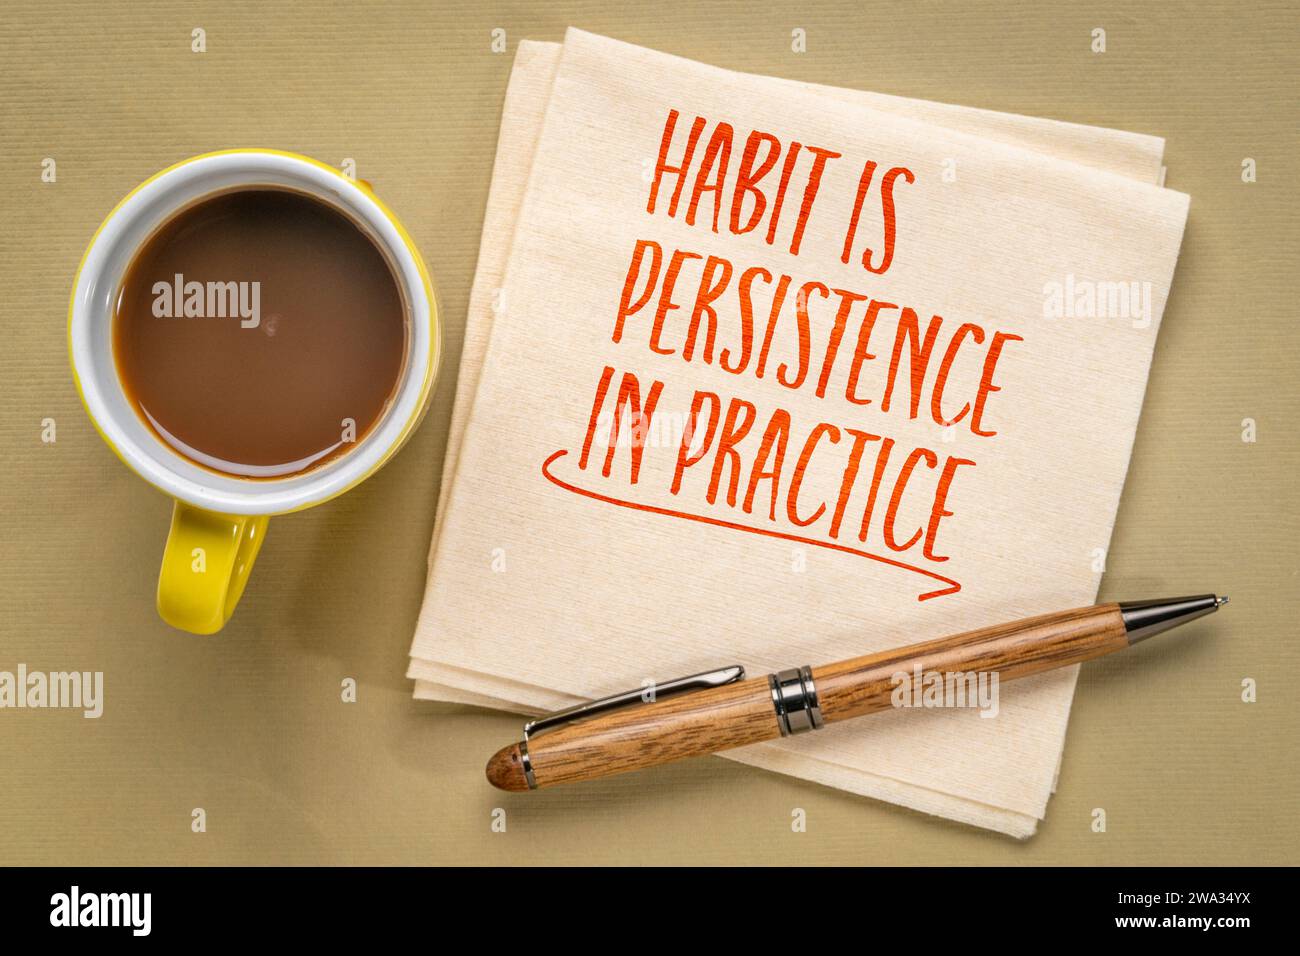 habit is a persistence in practice - inspirational reminder note on napkin, personal development concept Stock Photo